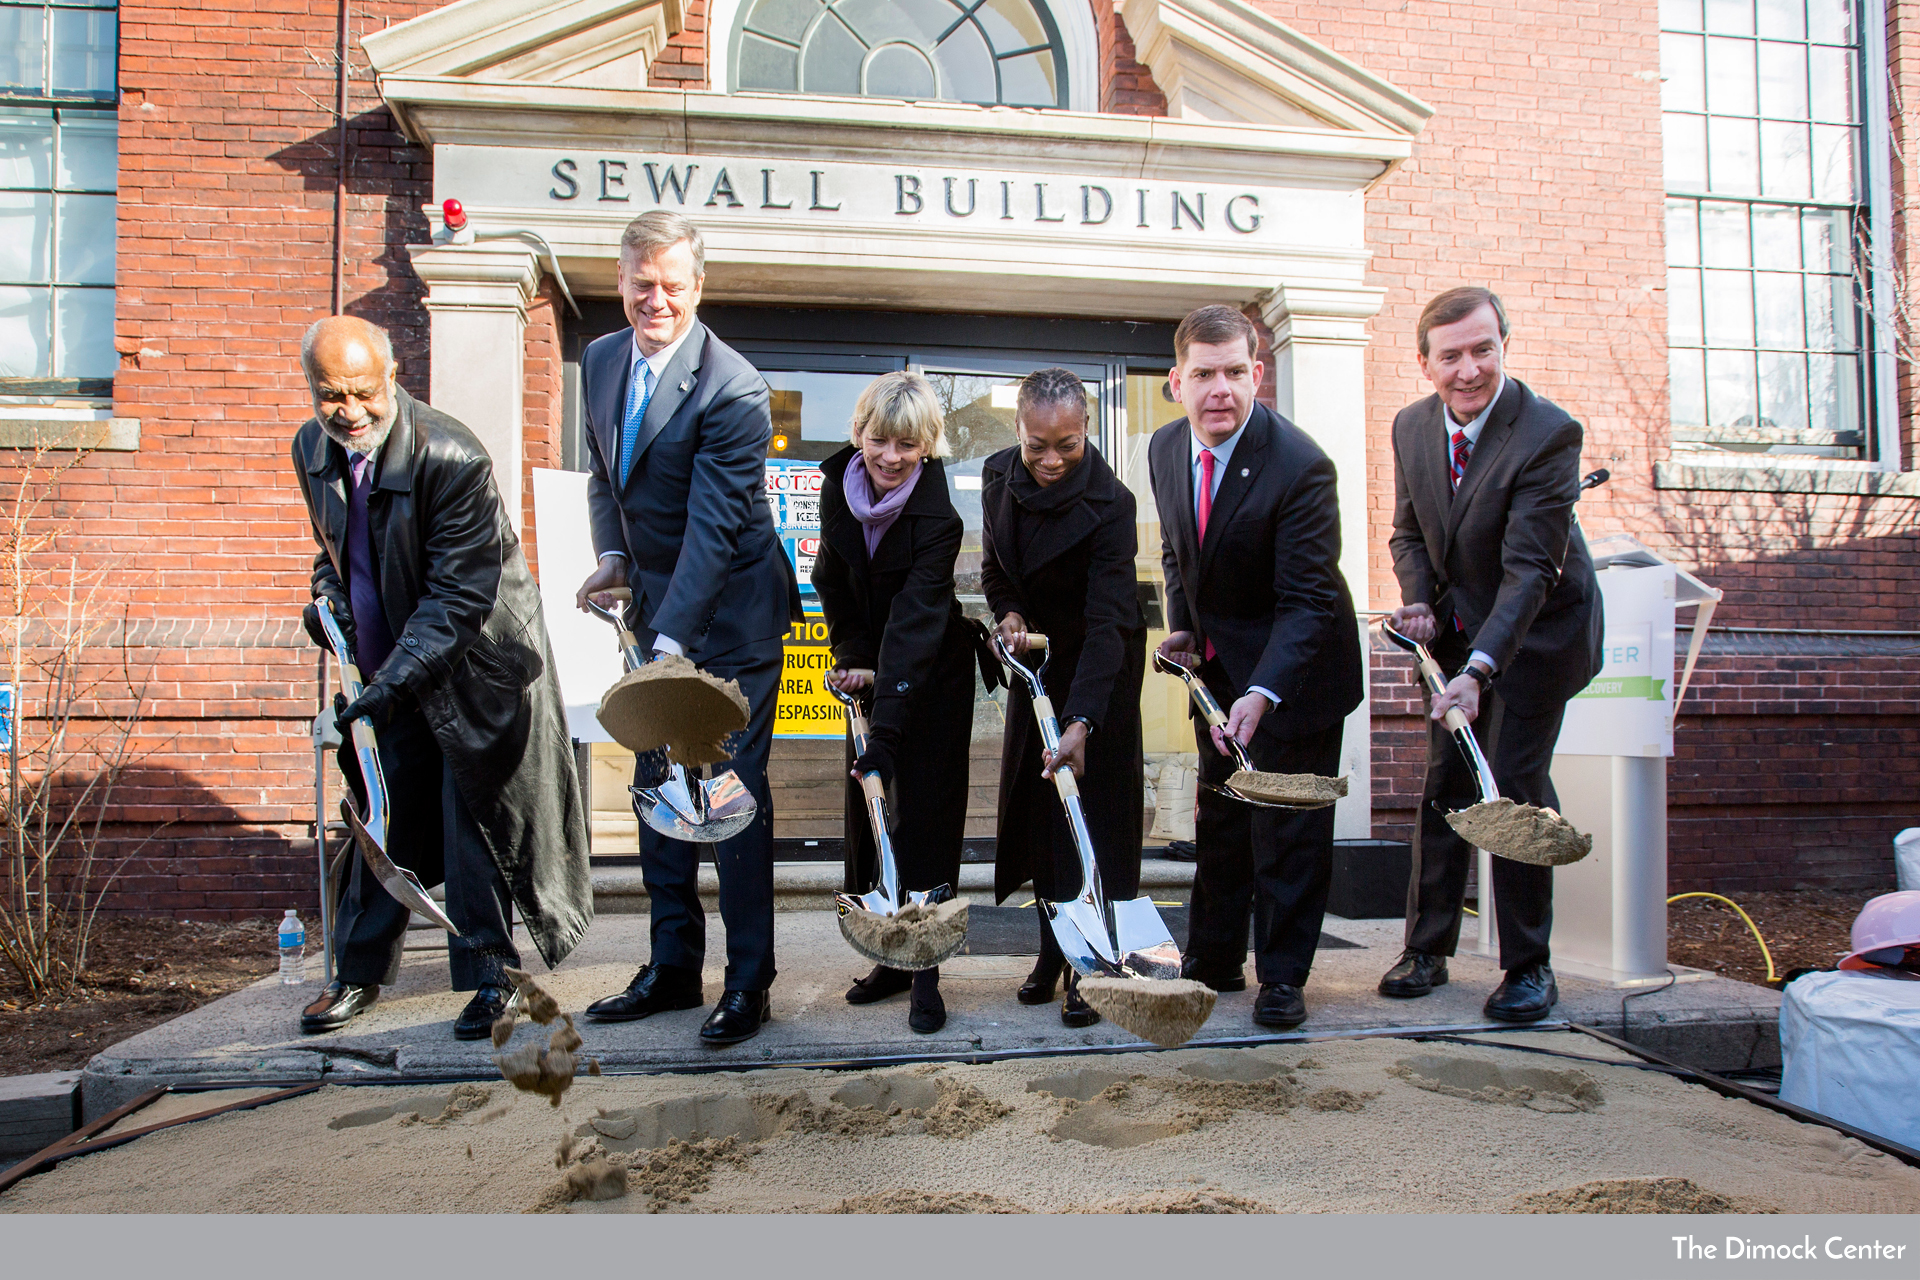 Groundbreaking for a renovated brick building behind MA Gov. Baker and Boston Mayor Walsh at end of a fundraising campaign